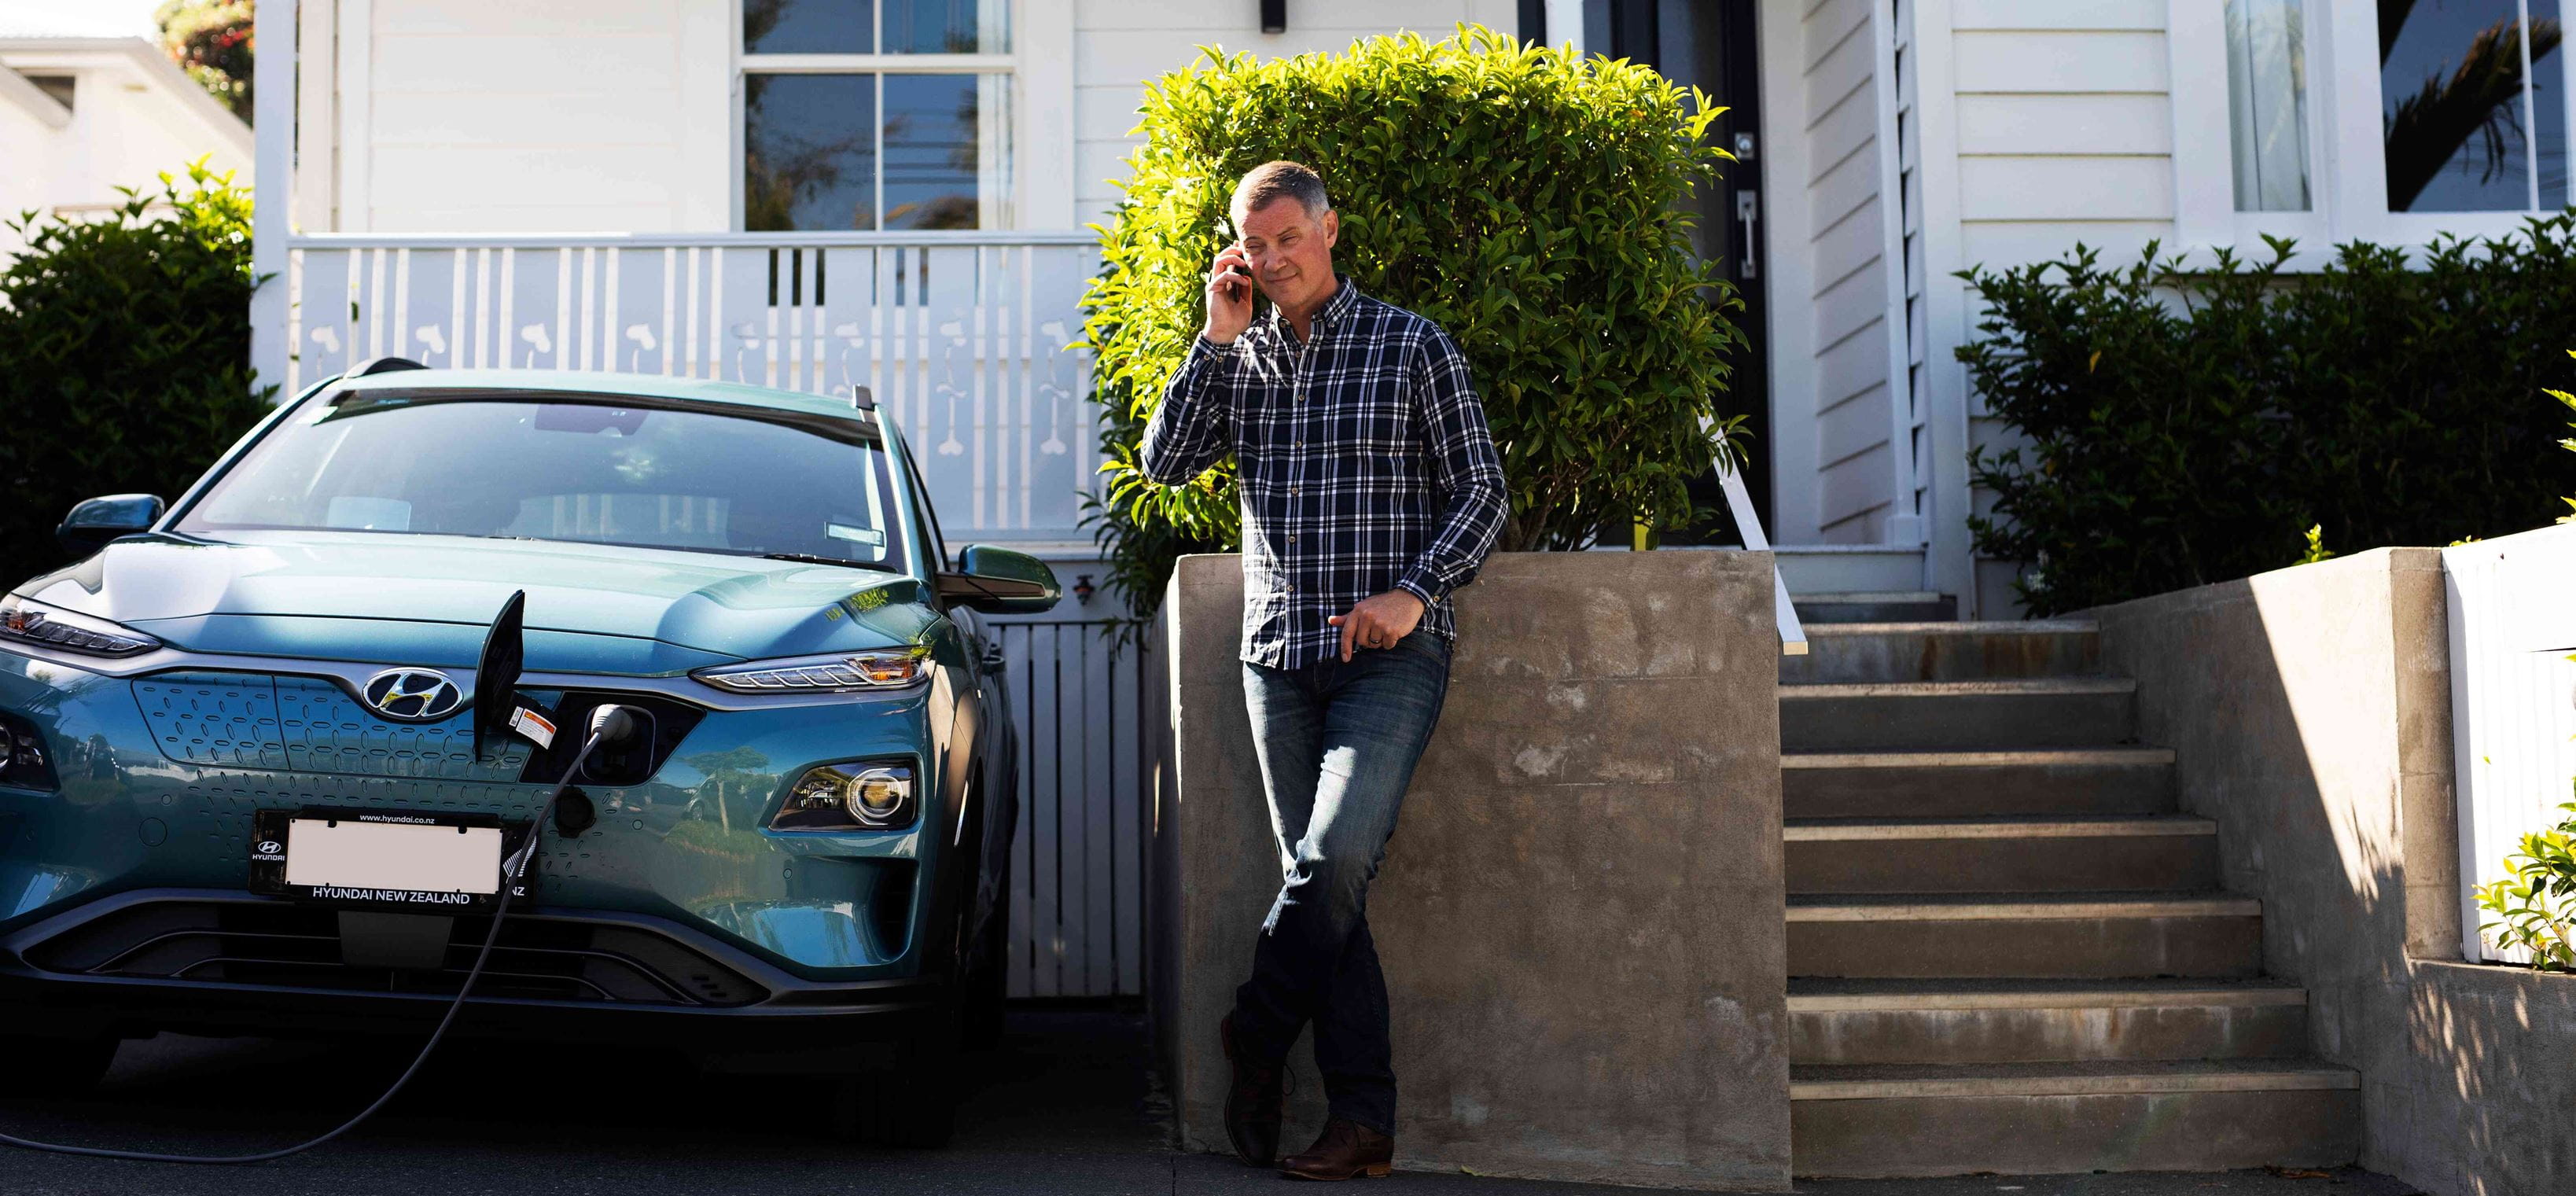 A man talking on a cell phone in front of the house while the electric vehicle is charging